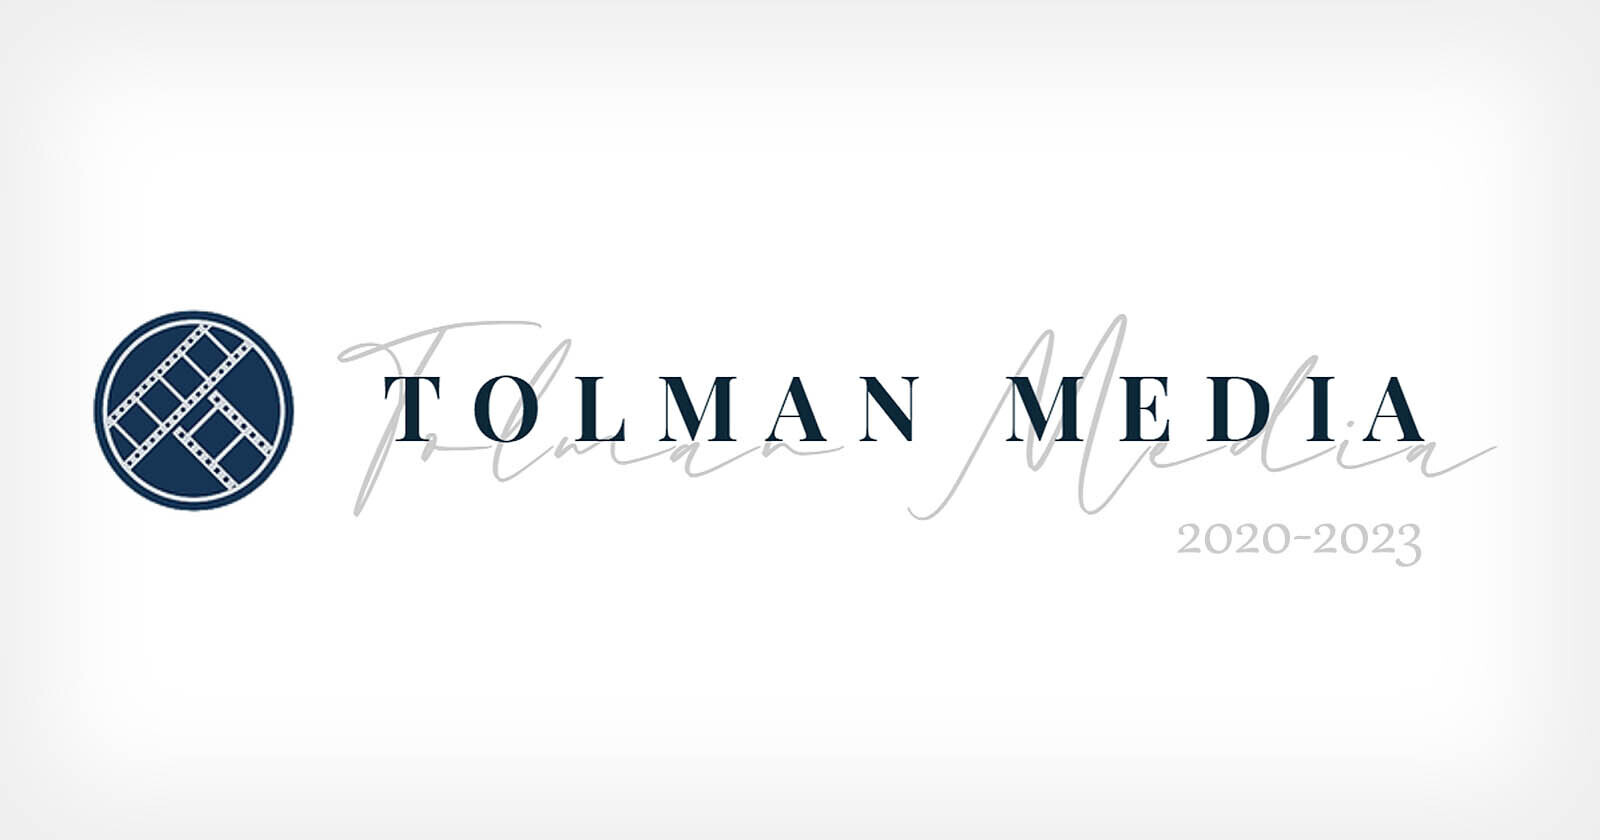 Tolman Media Shutdown Leaves Photographers and Clients Empty-Handed